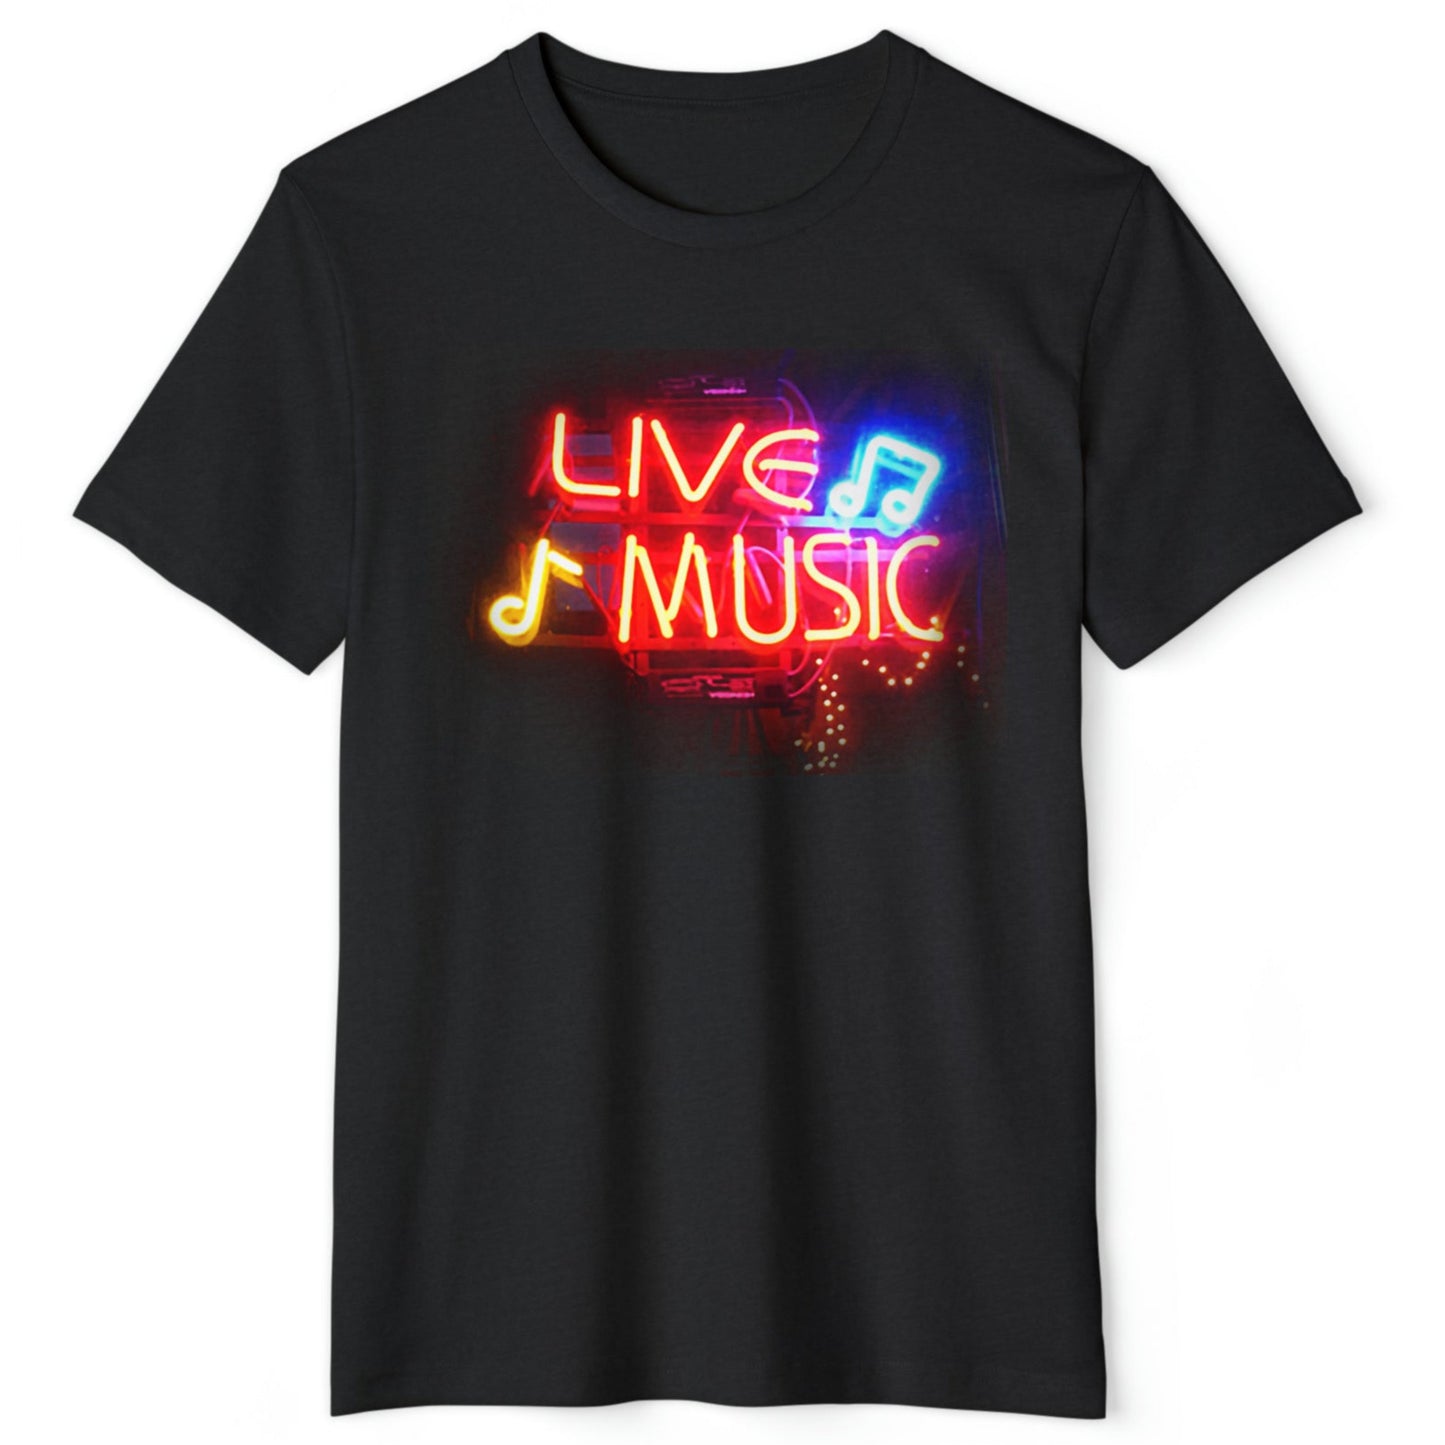 Live MUSIC T-shirt Neon Sign graphic on Recycled Organic fabric